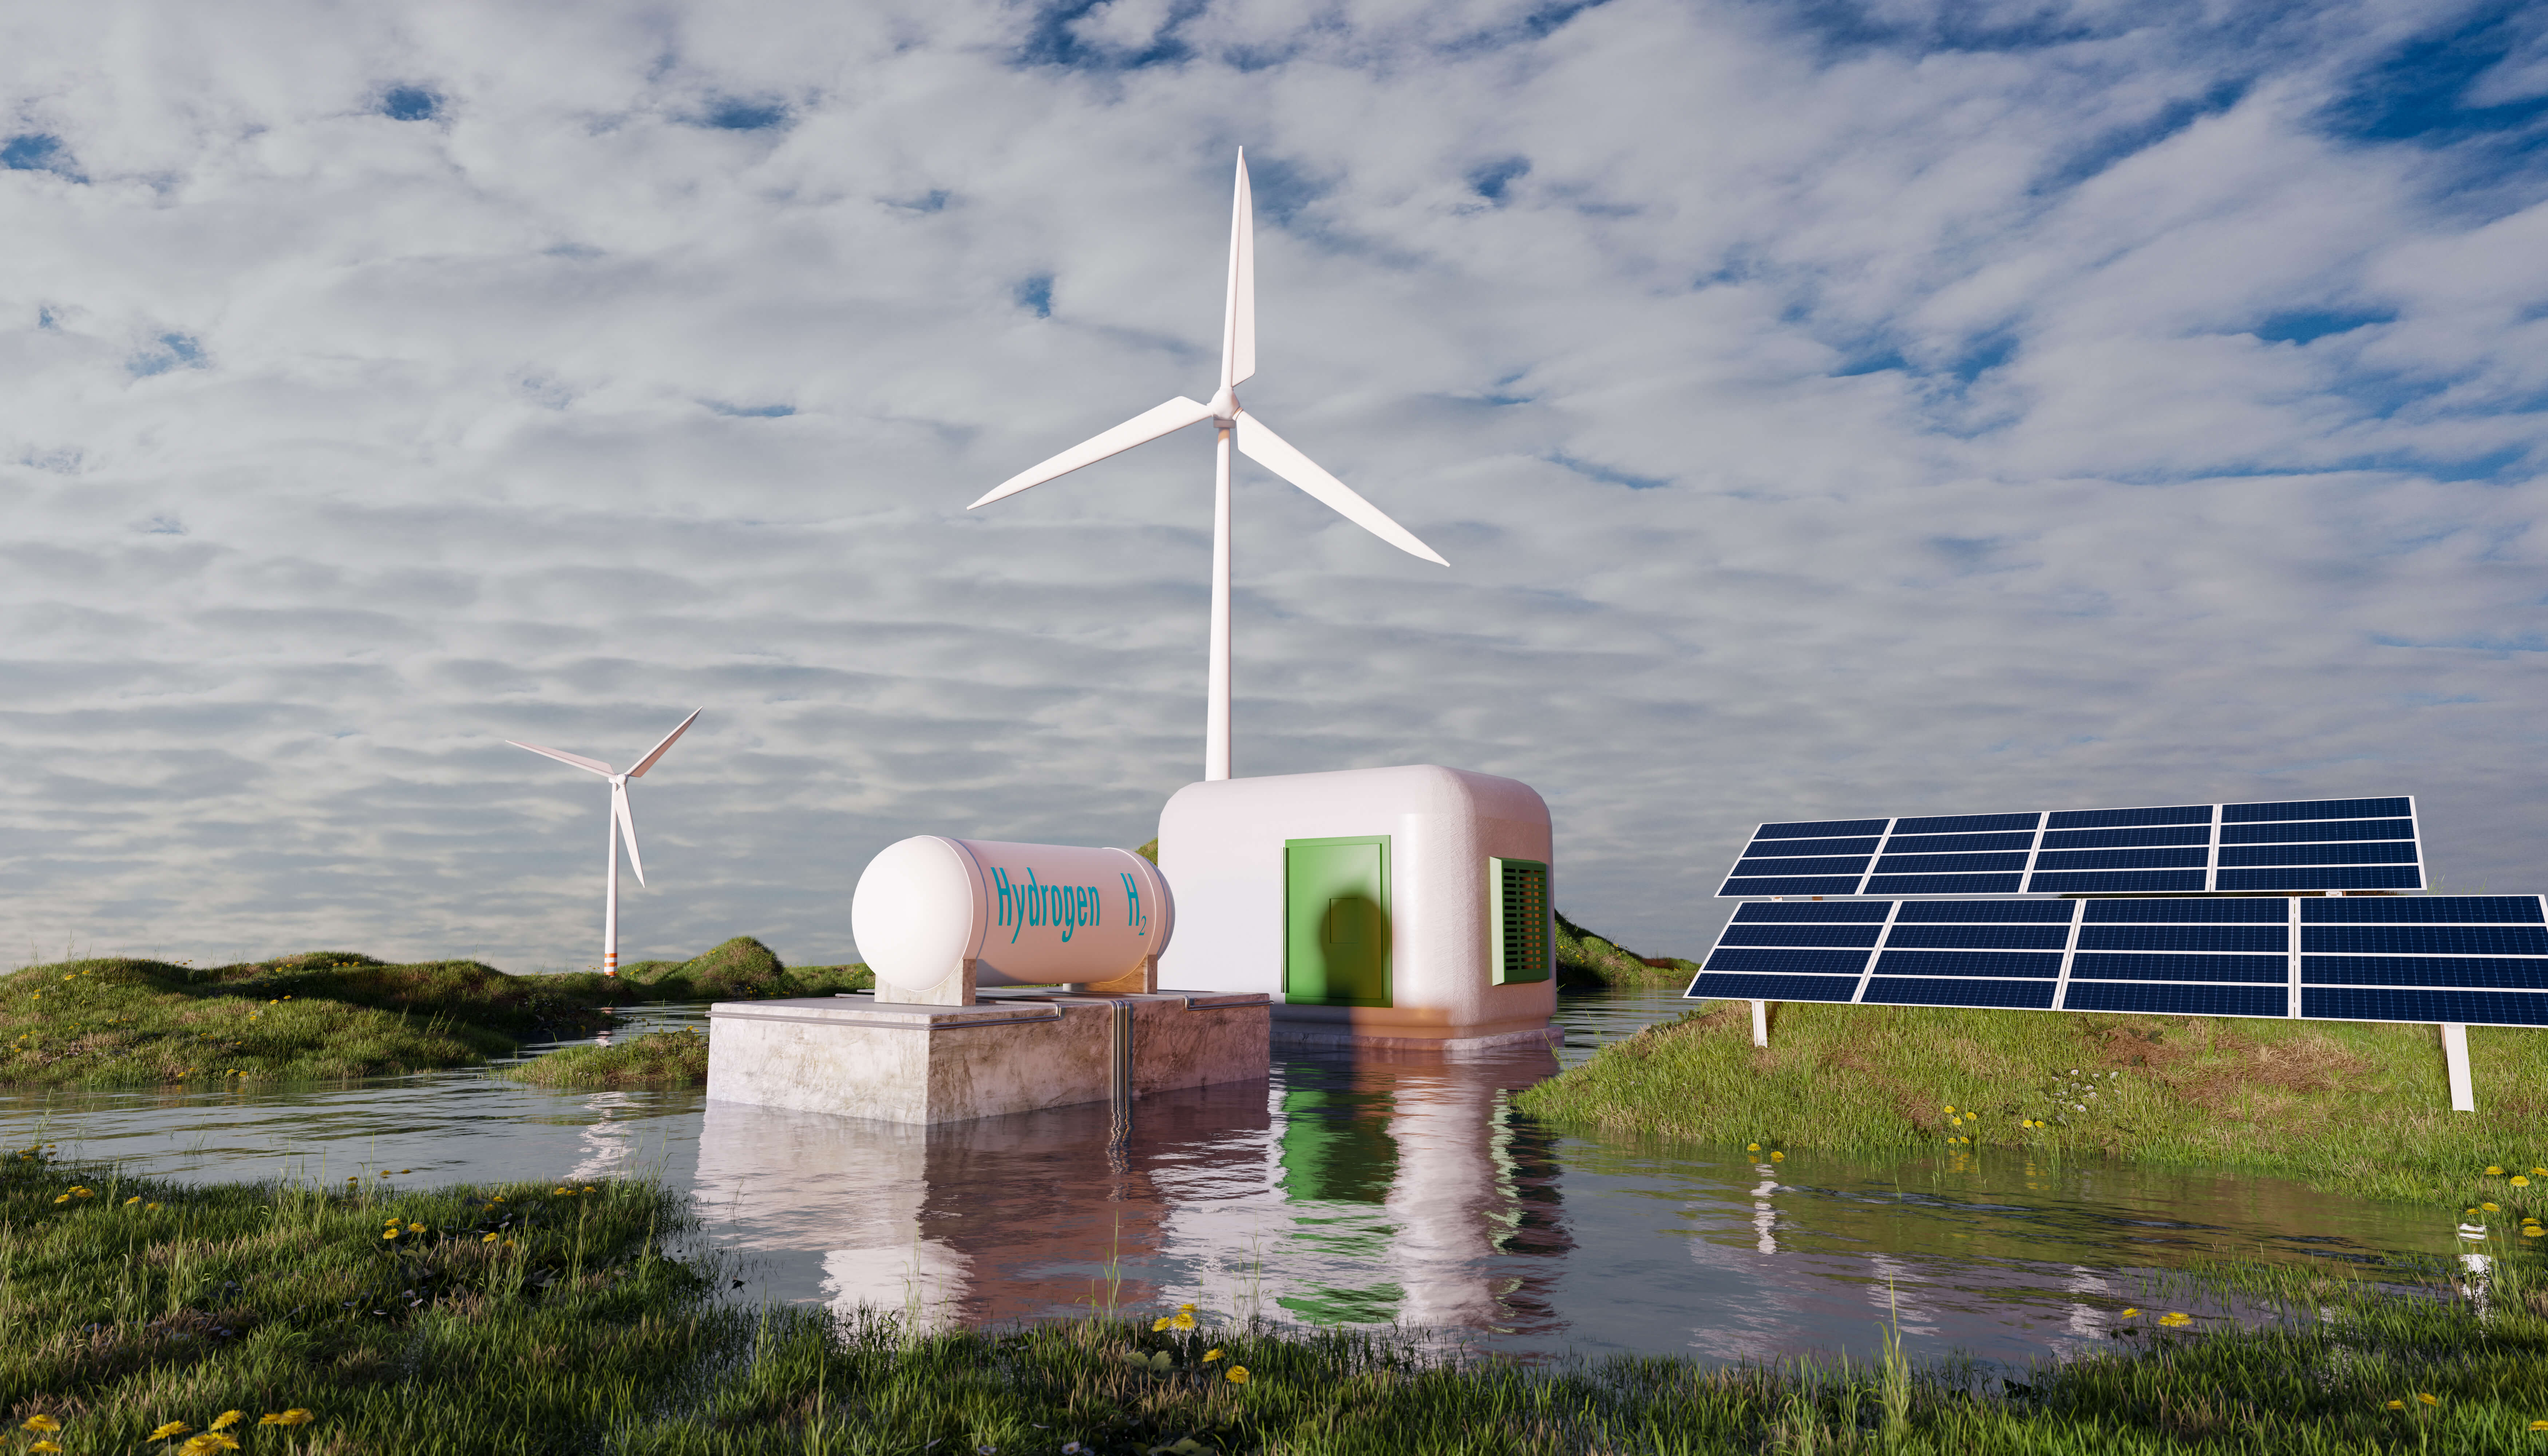 Hydrogen fuel storage and solar panel with wind turbines, green power concept, 3d illustration rendering